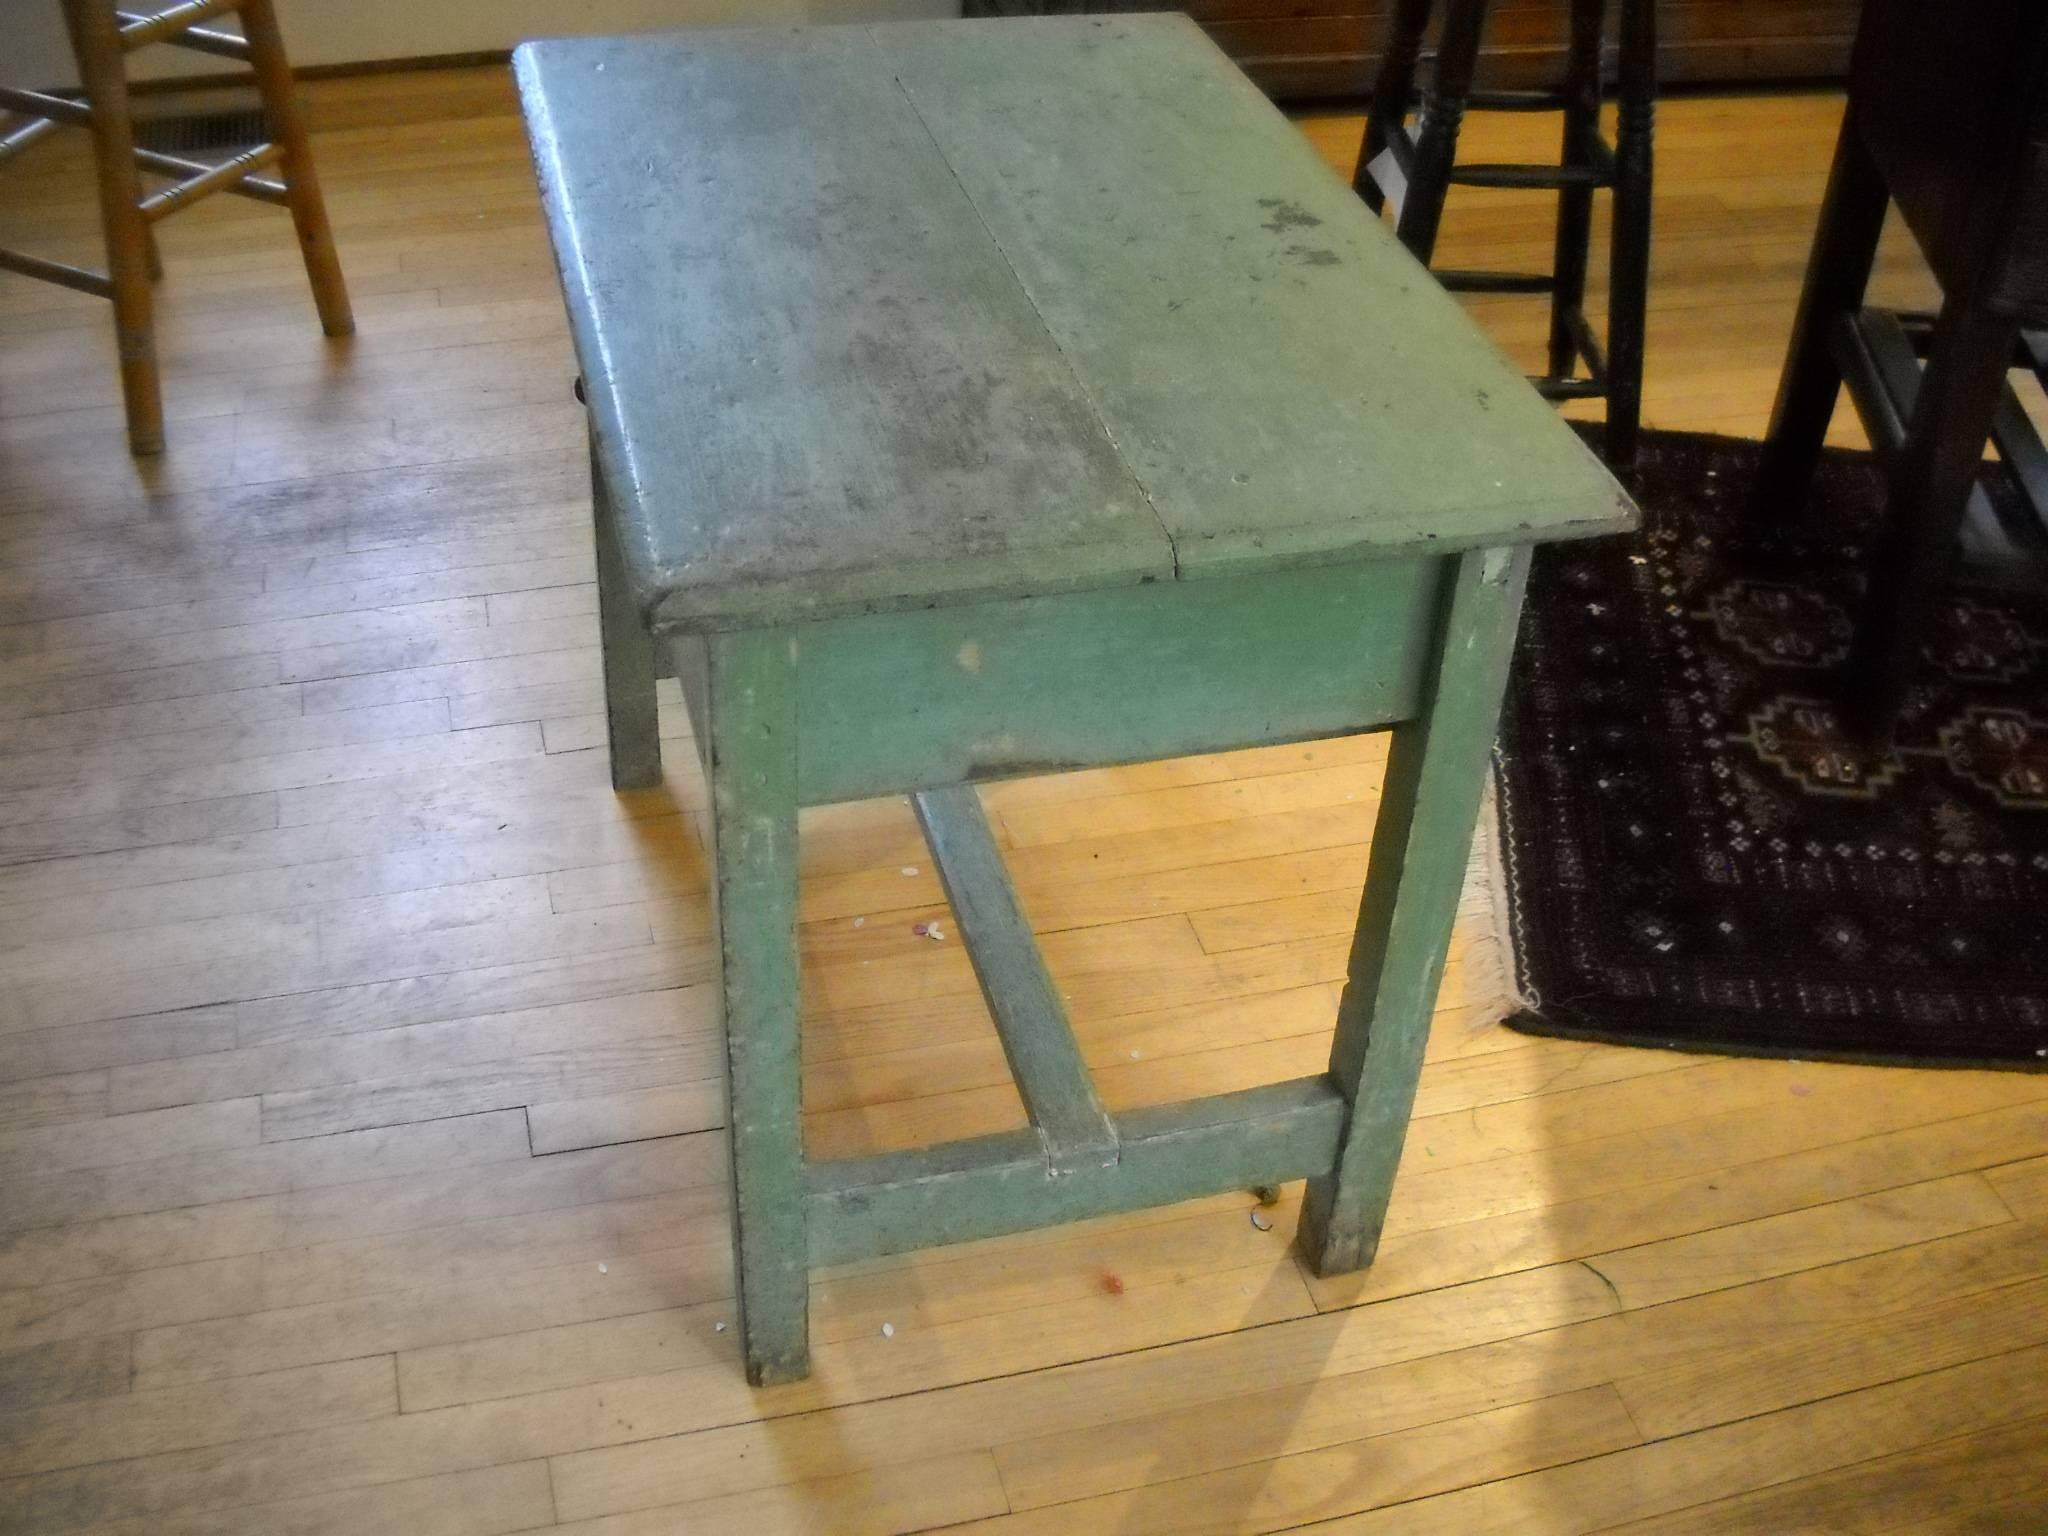 It's the soft rich green original paint that will get your attention first and then the large storage drawer for a small table. The T cross stretcher completes this very nice painted English table.